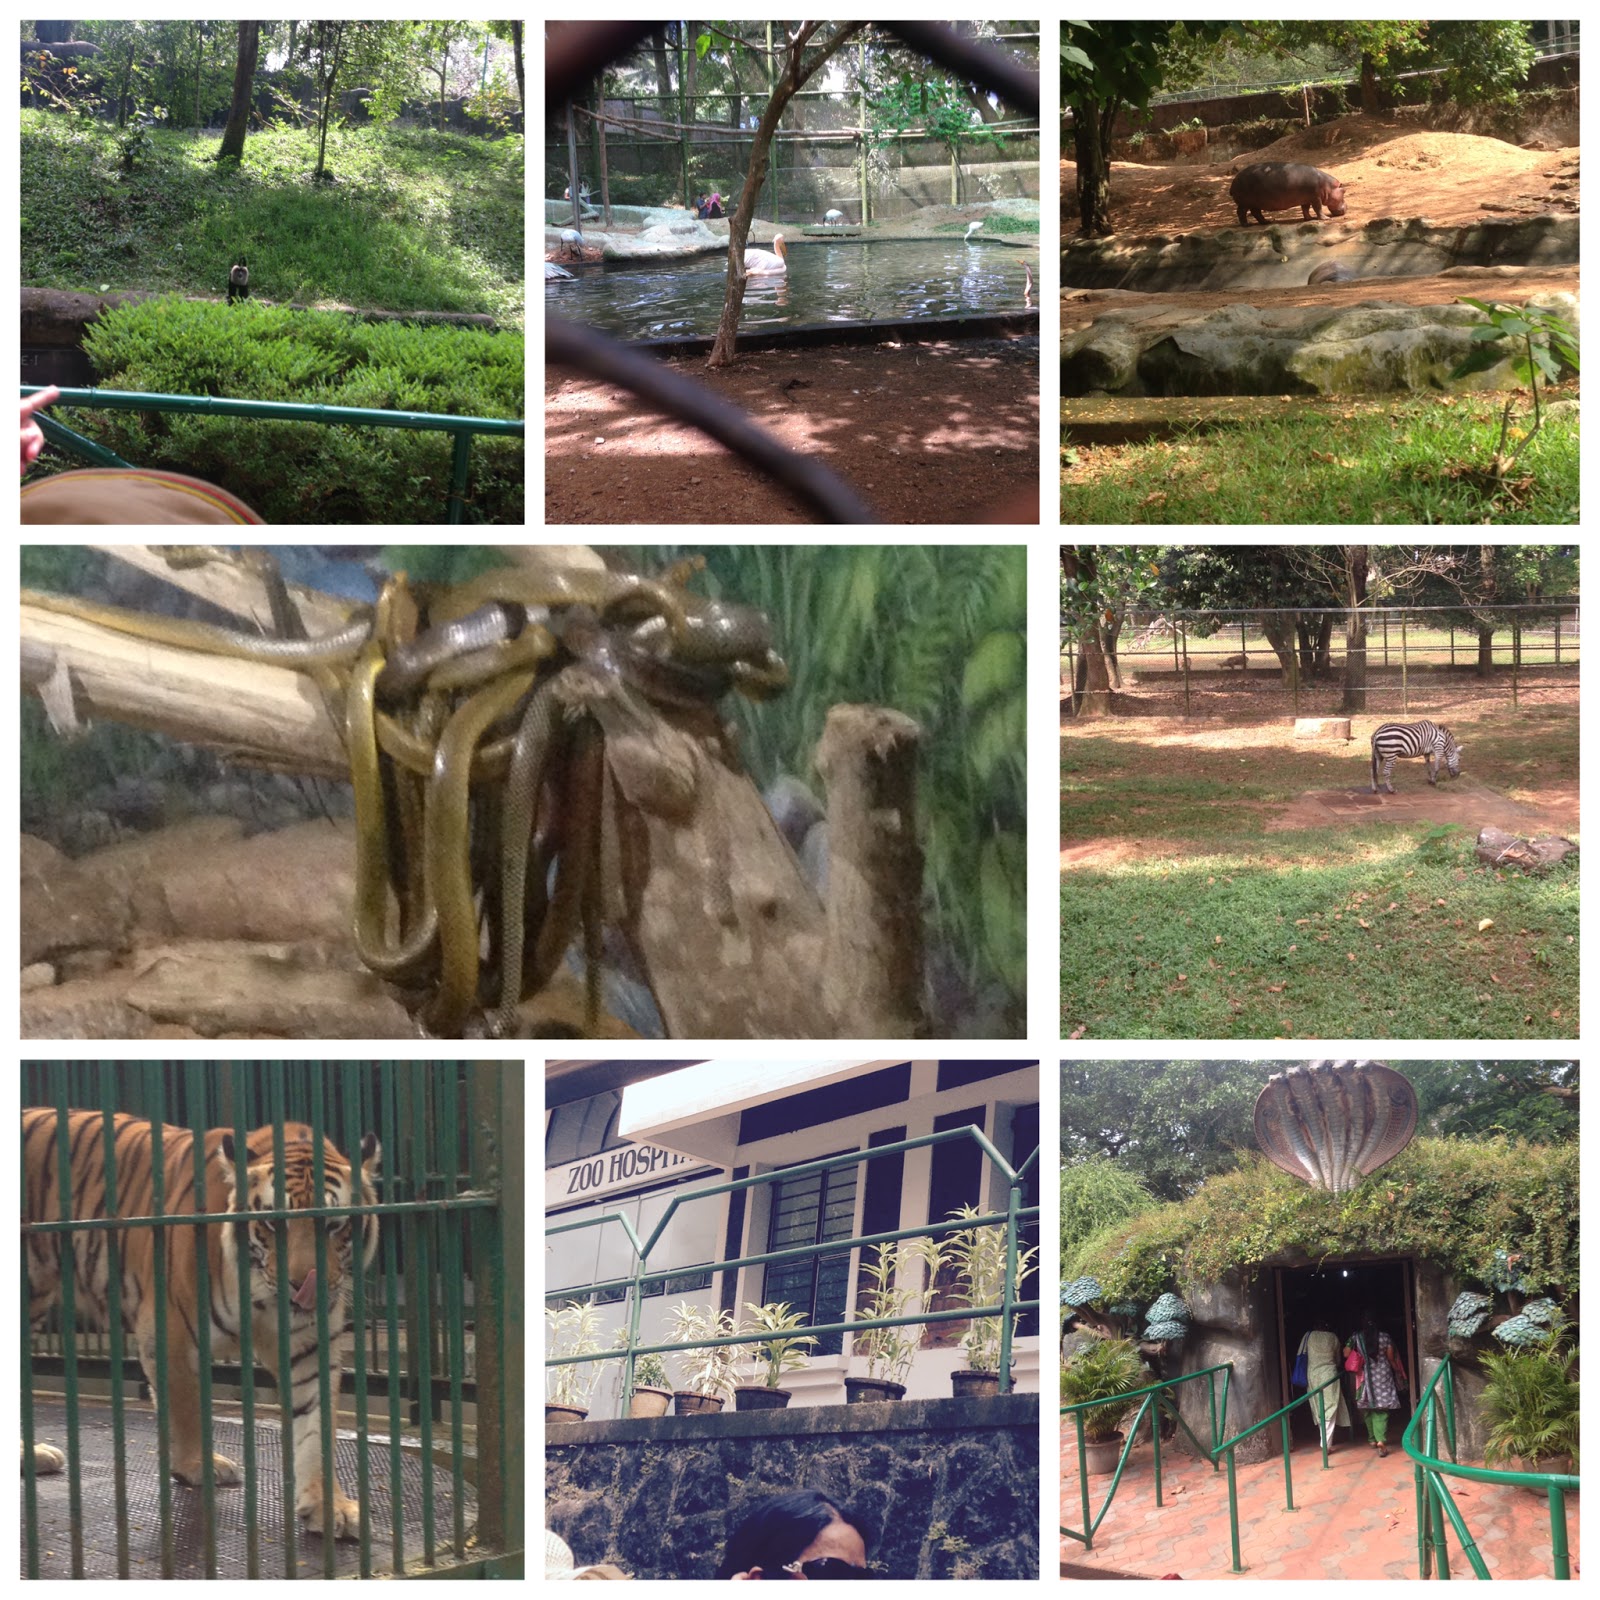 Life As It Is...: A Visit To The Trivandrum Zoo